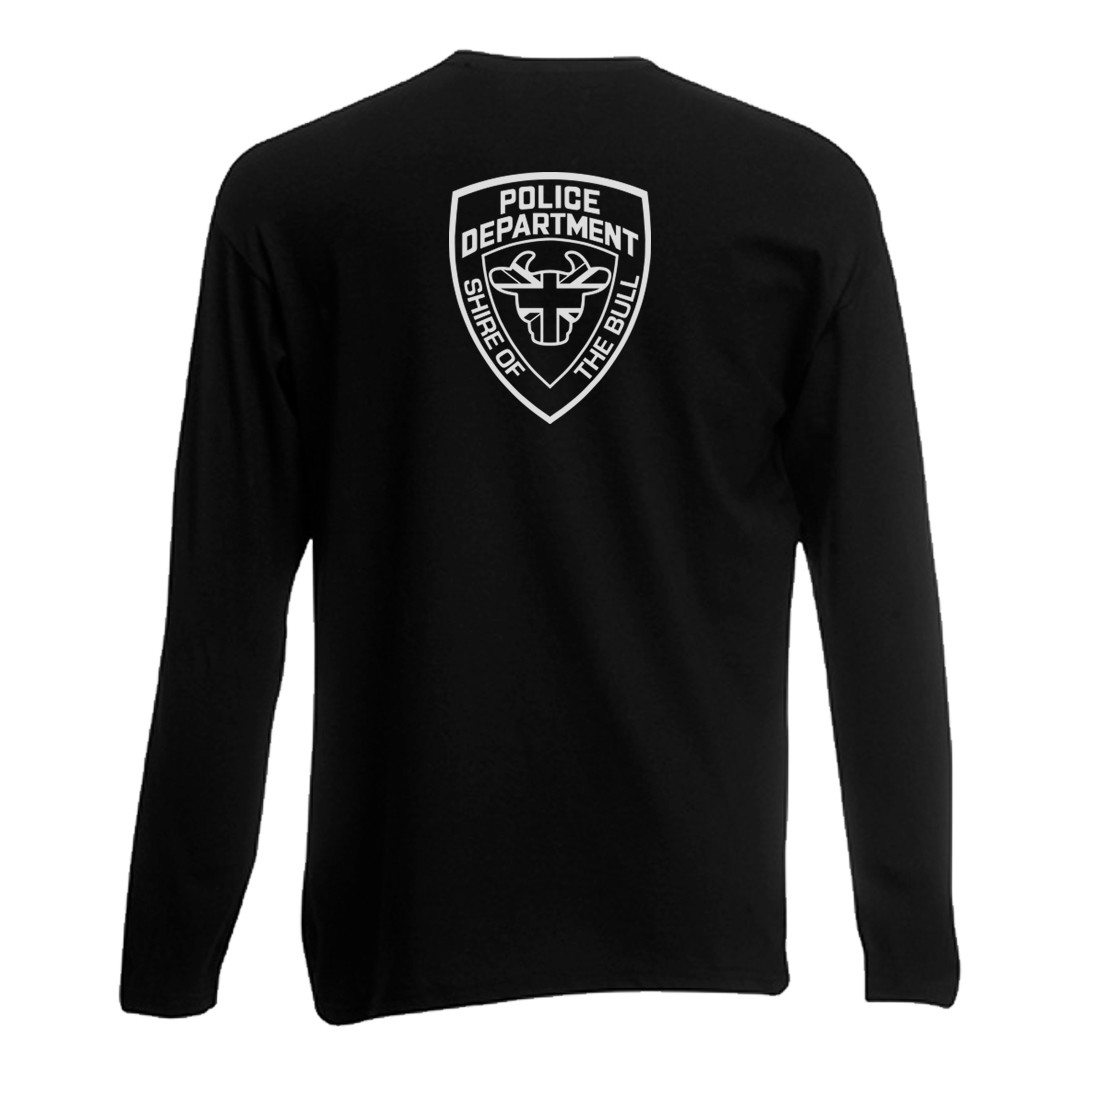 Project Shield: Long Sleeve Crew Neck